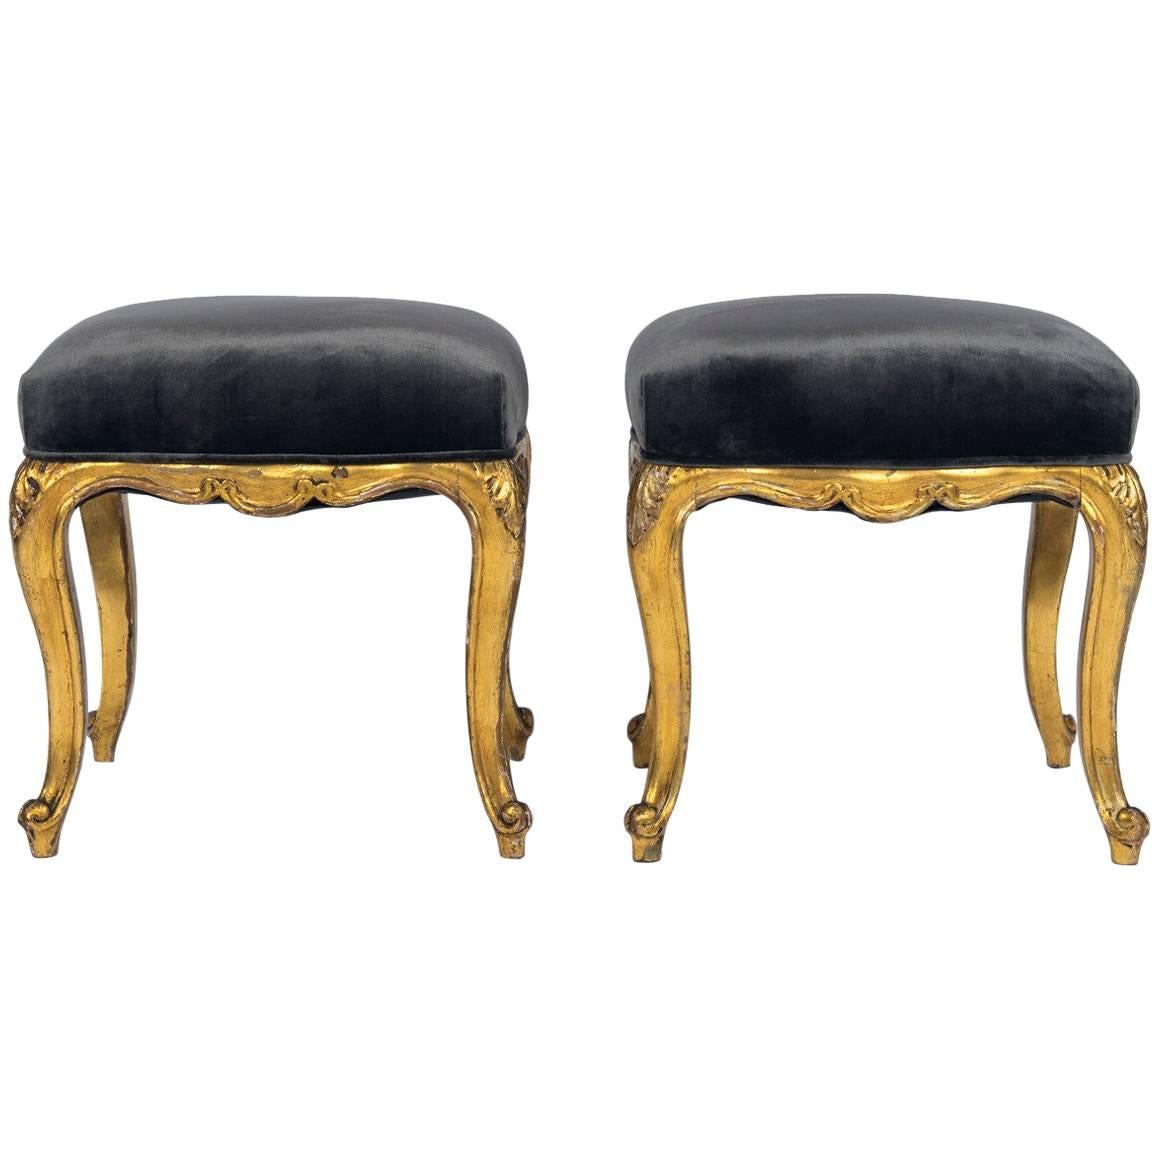 Pair of 19th Century Louis XV Style Giltwood Stools